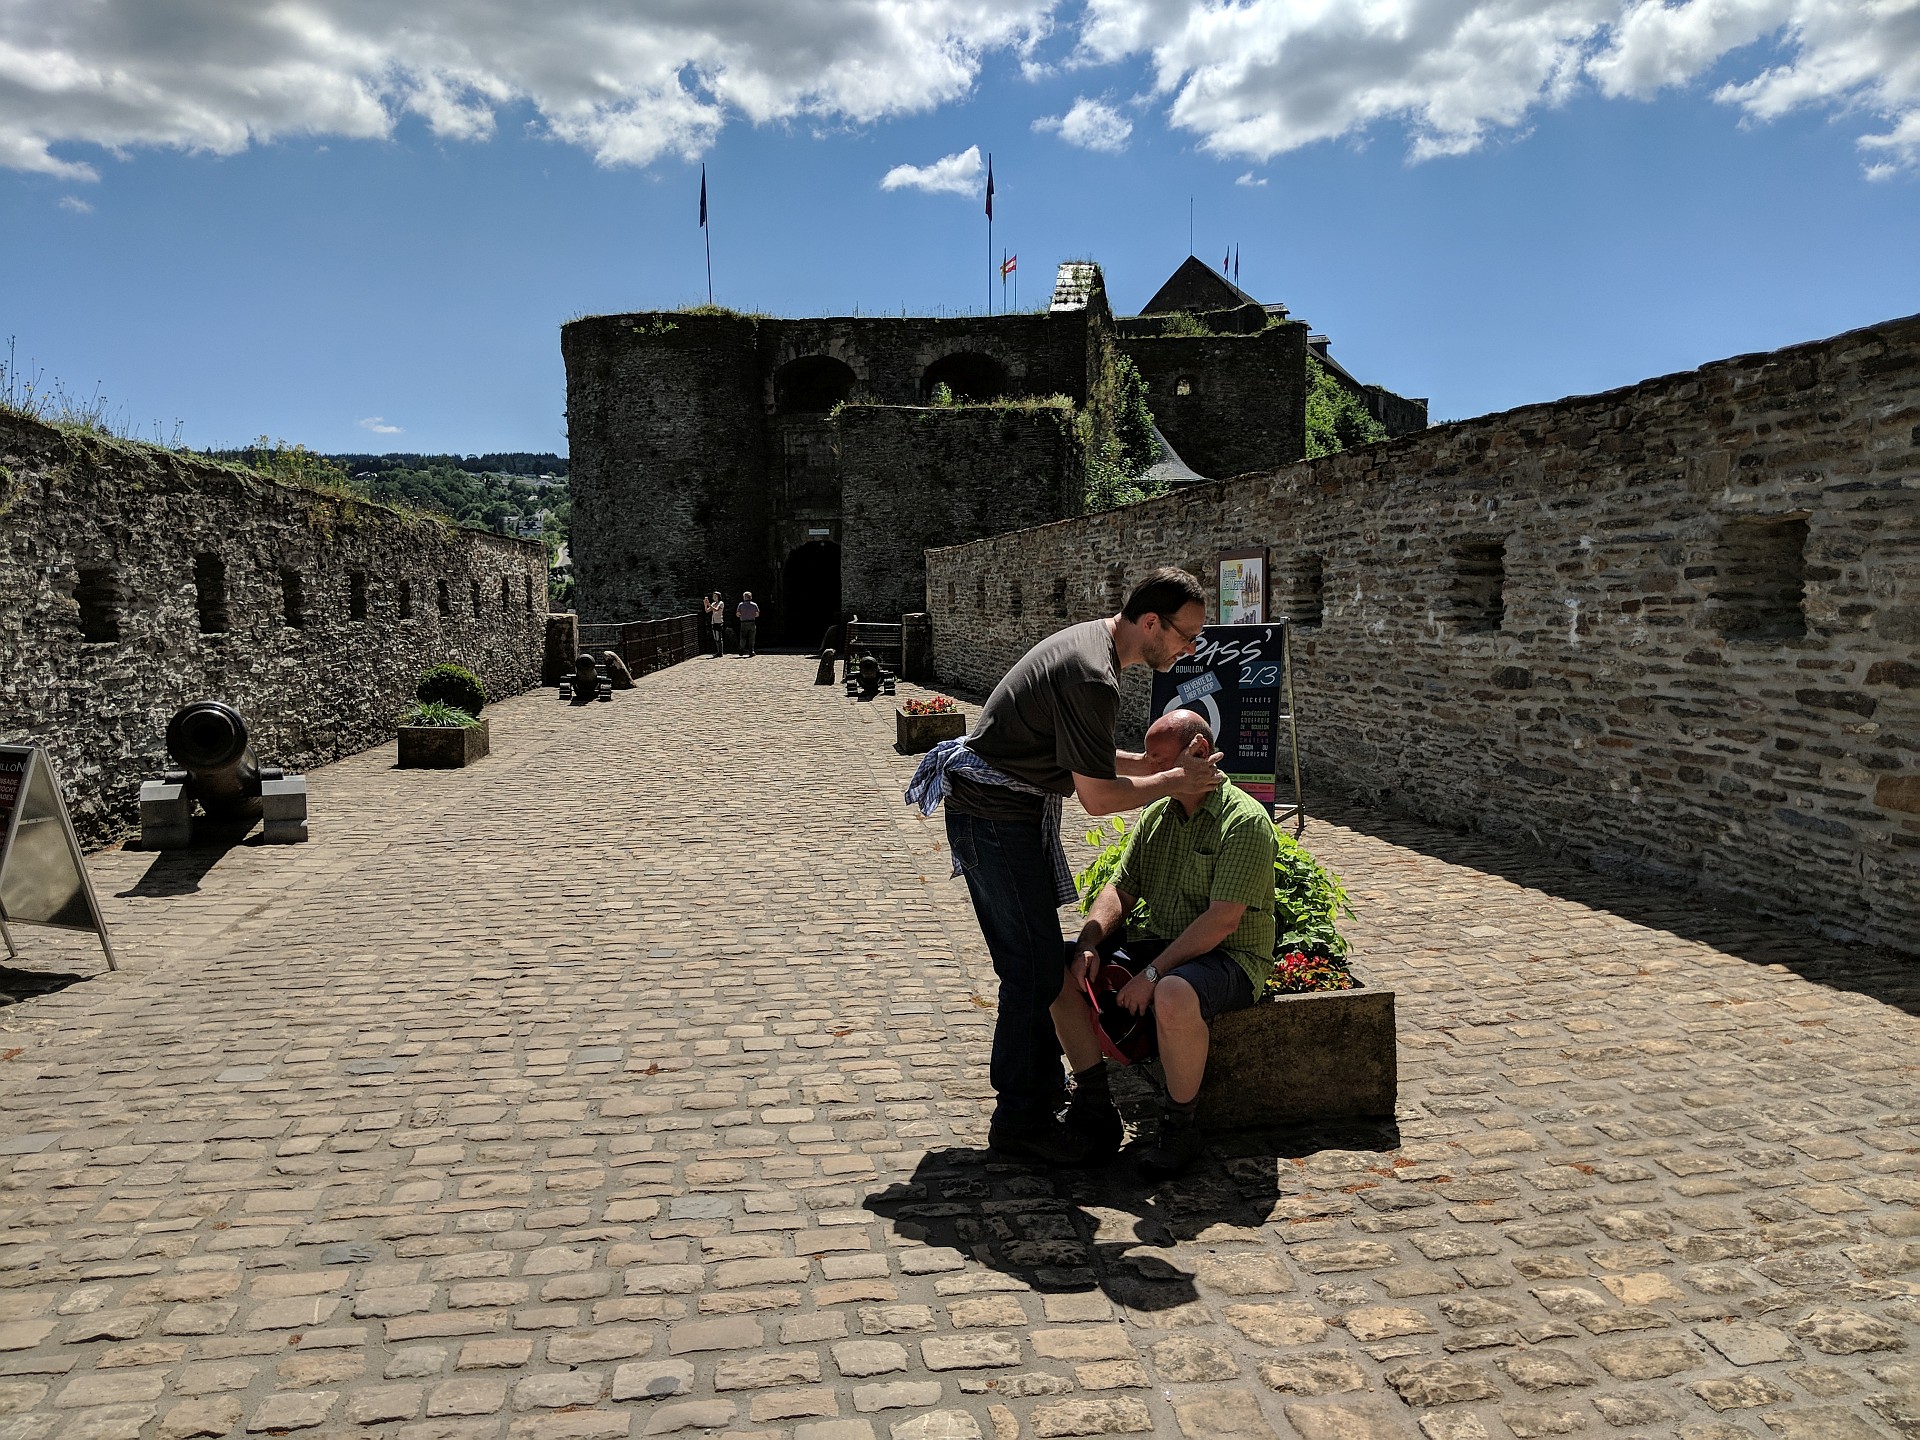 Dr Richards checking a spine at a castle in Bouillon, Belgium.